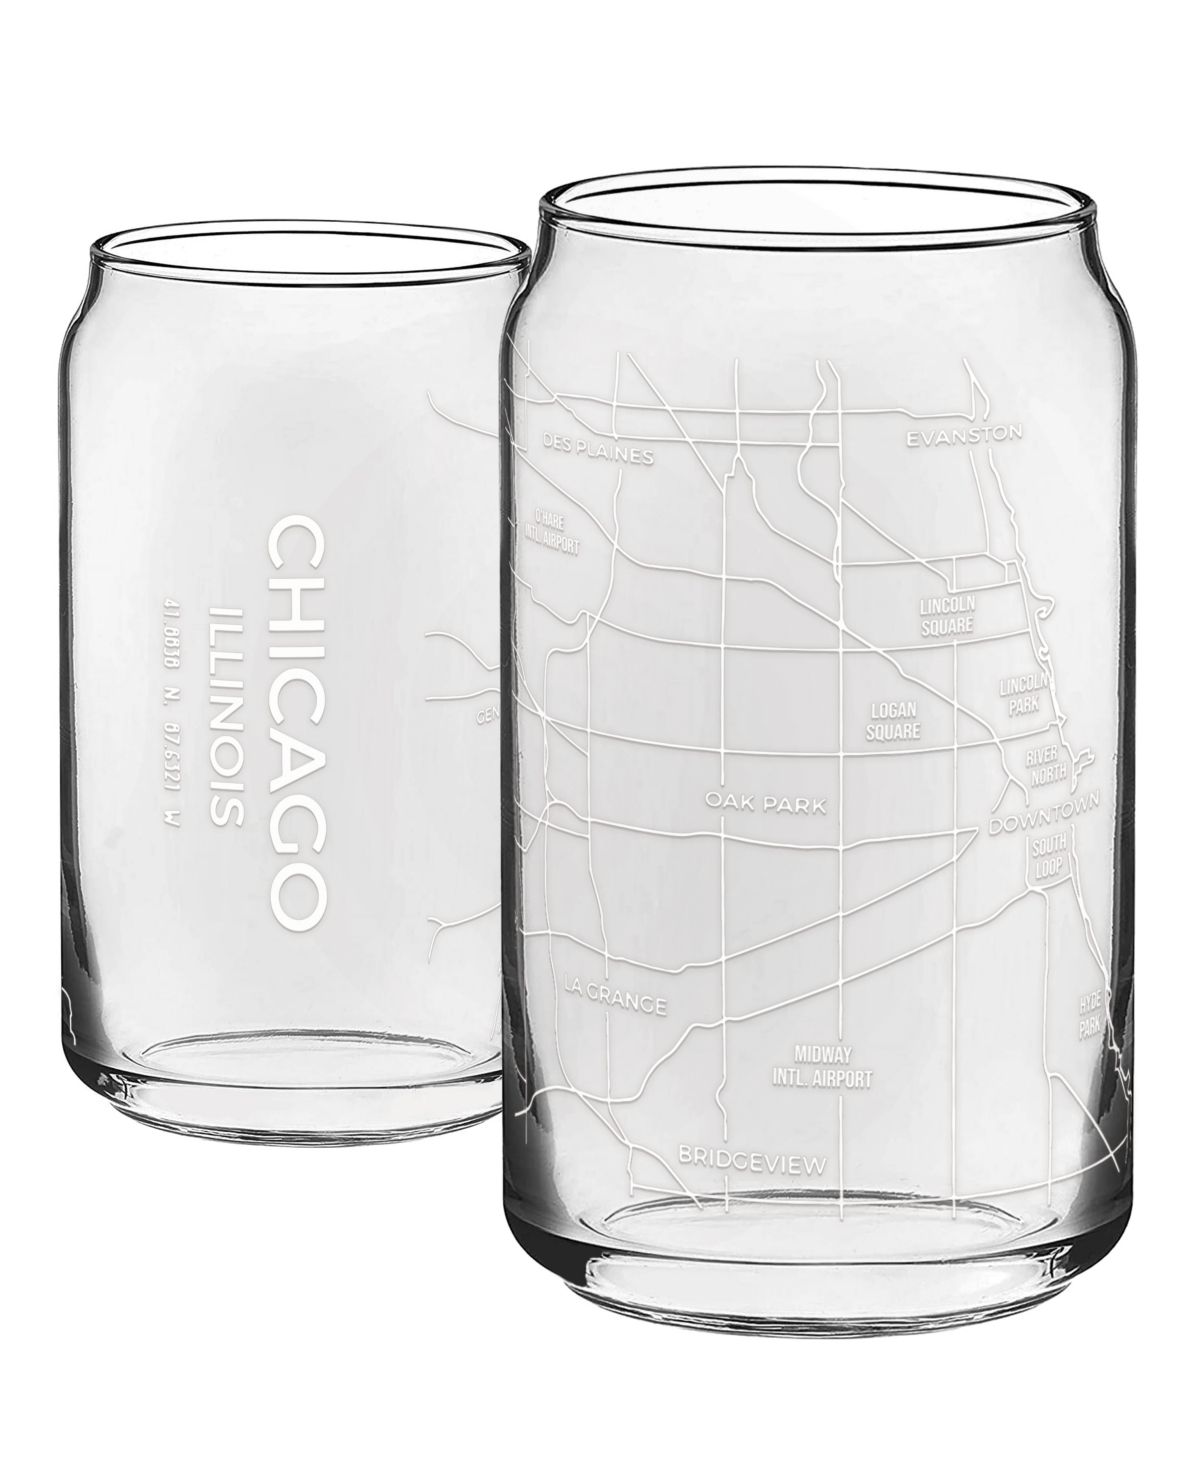 Narbo The Can Chicago Map 16 oz Everyday Glassware, Set Of 2 In White